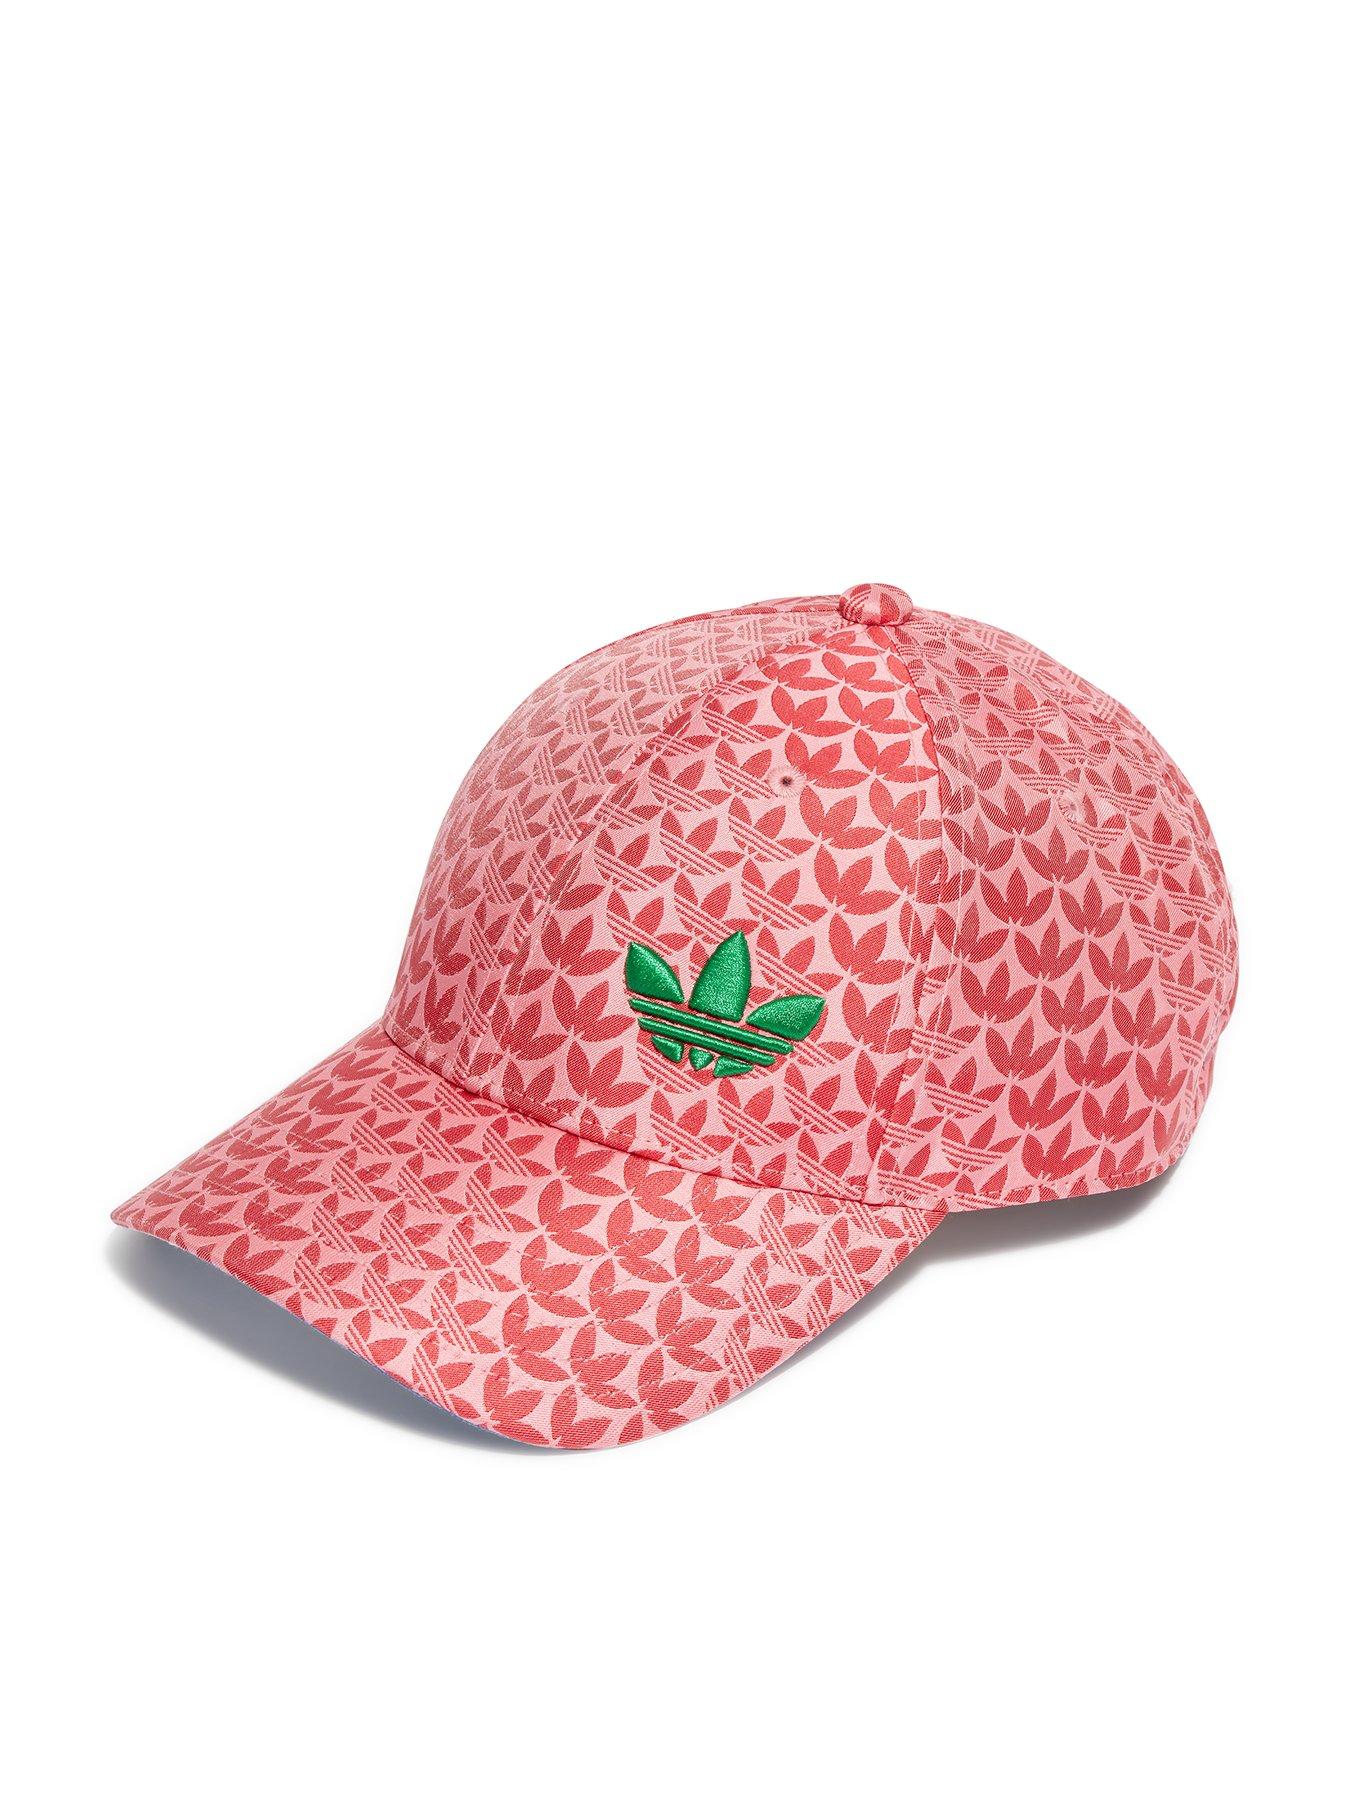 WOMEN FASHION Accessories Hat and cap Pink Adidas hat and cap discount 73% Pink Single 